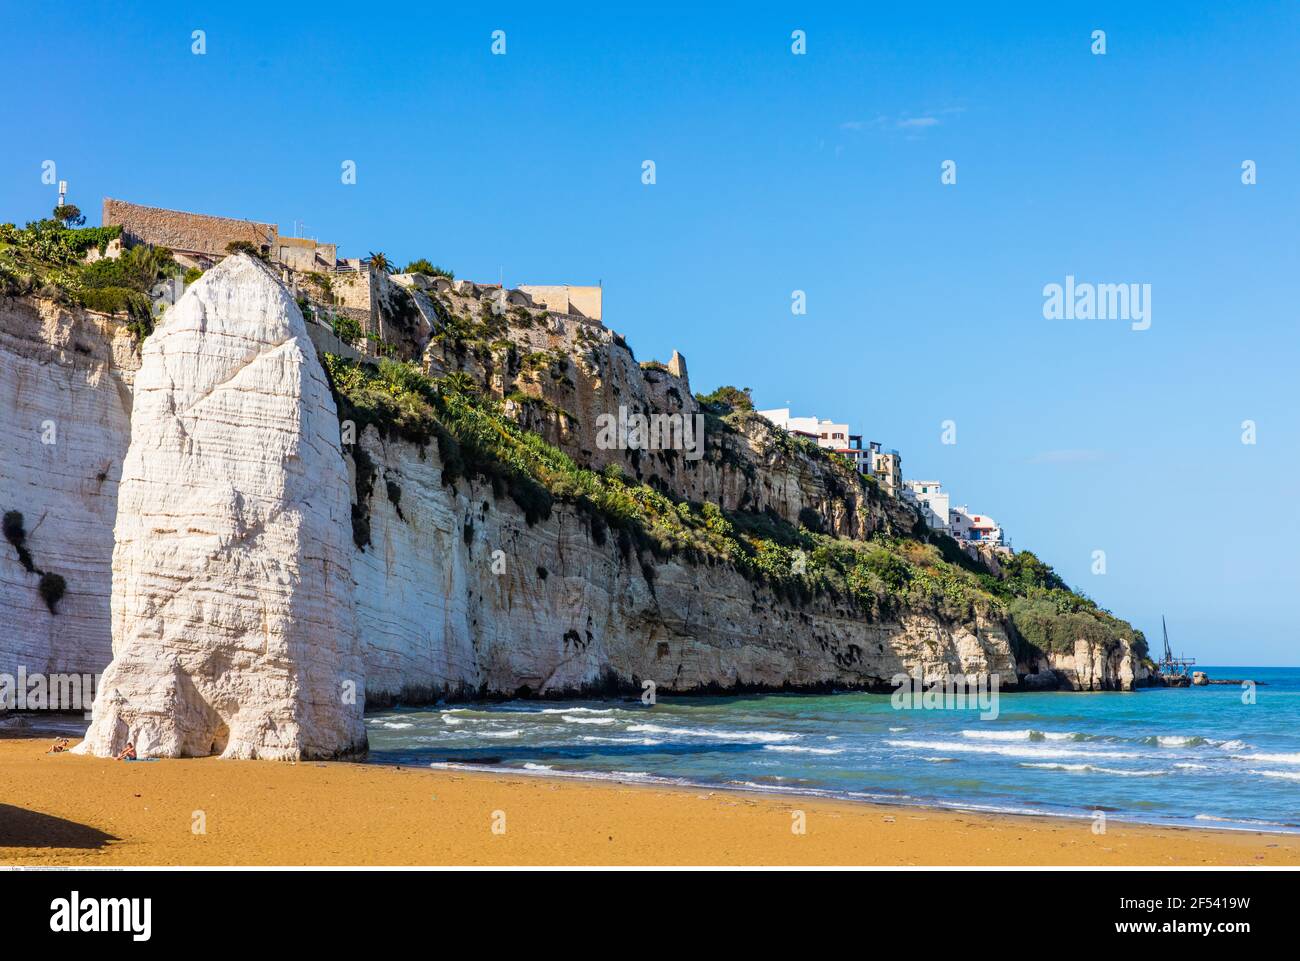 Geographie / Reisen, Pizzomunno Rock, Vieste, Italien, Apulien, Additional-Rights-Clearance-Info-Not-Available Stockfoto